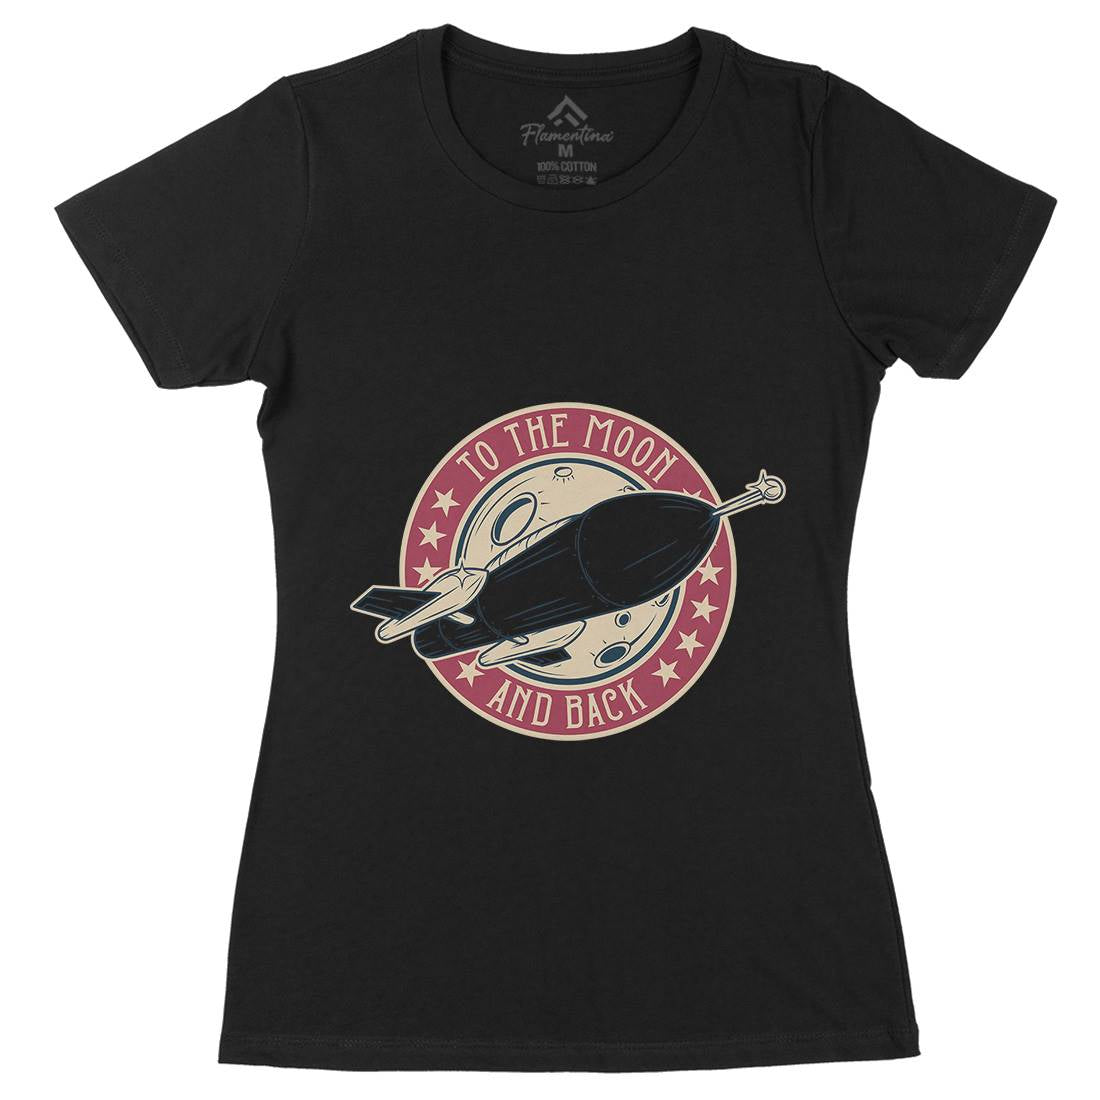 To The Moon Womens Organic Crew Neck T-Shirt Space D993